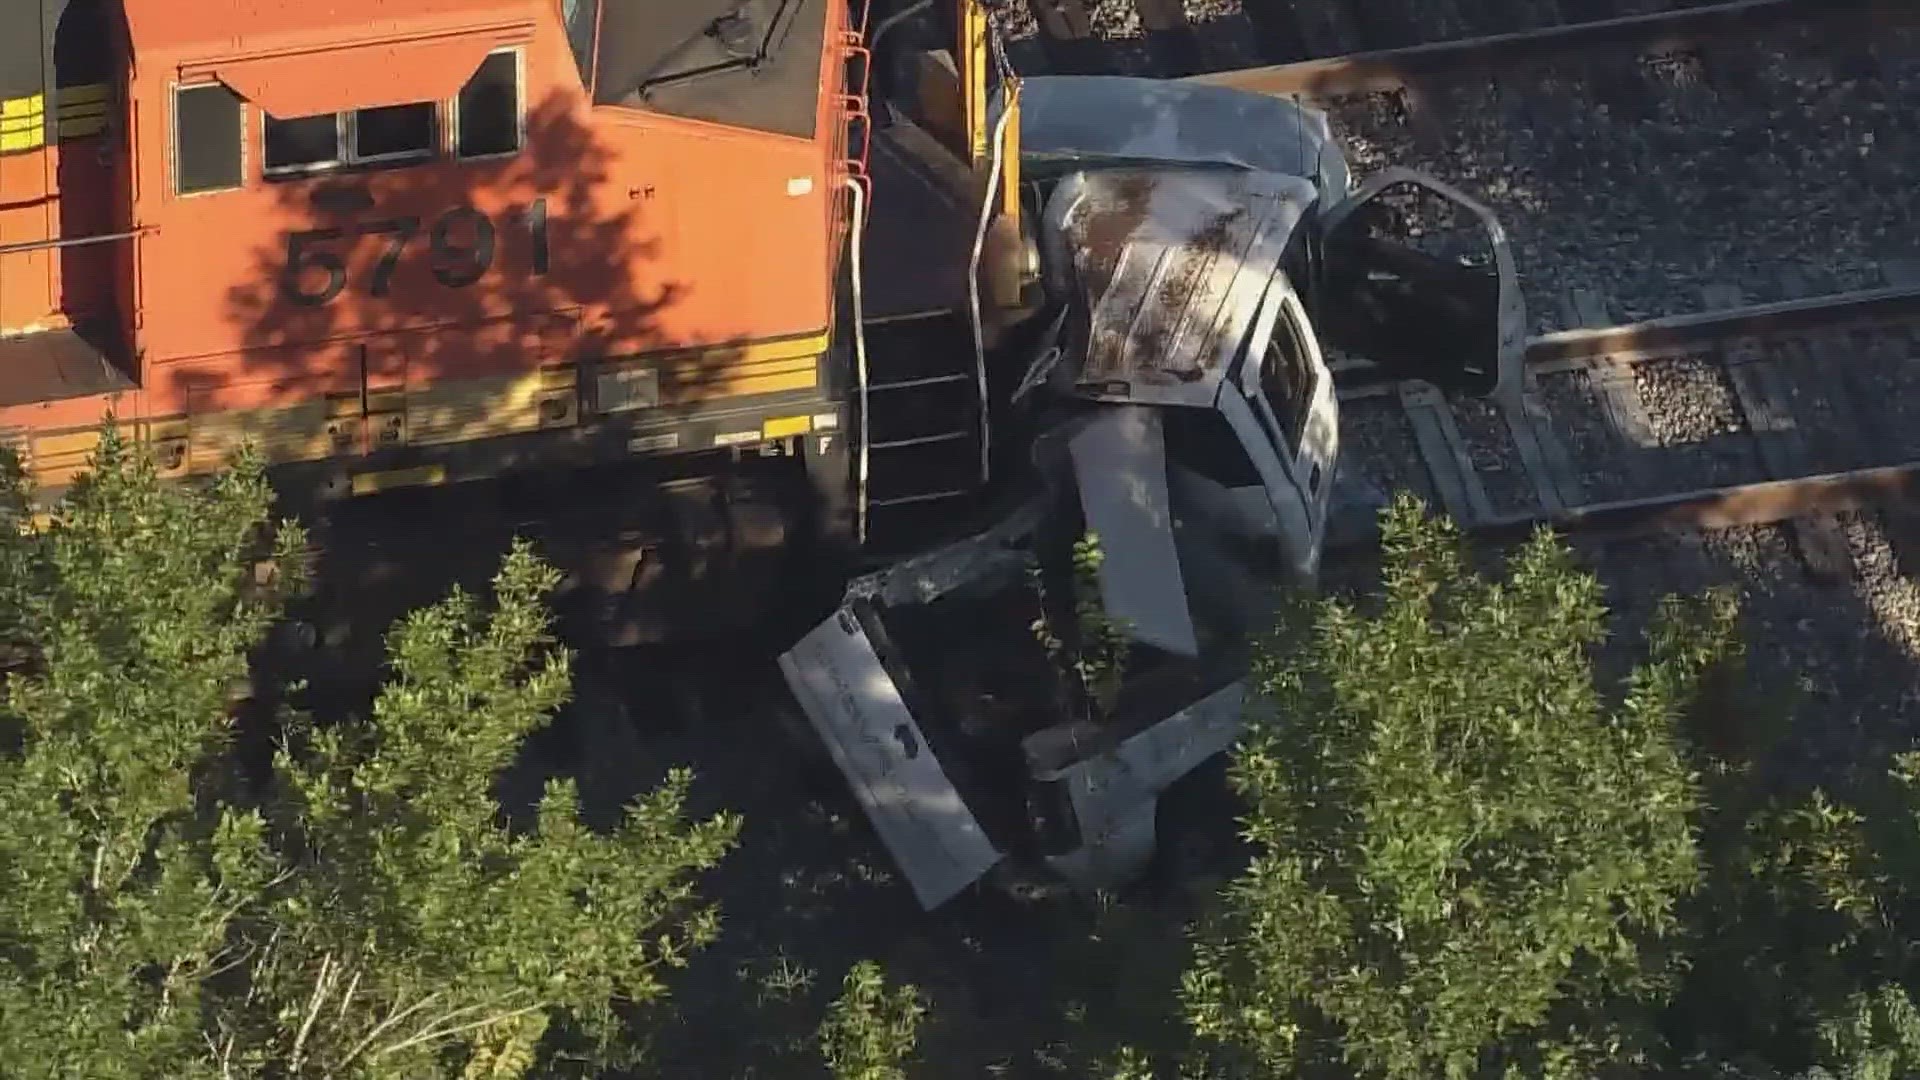 The train crashed into the truck on Mesa Drive. Views from Air 11 show a white pickup that appears to have been dragged for an extended distance along the tracks.